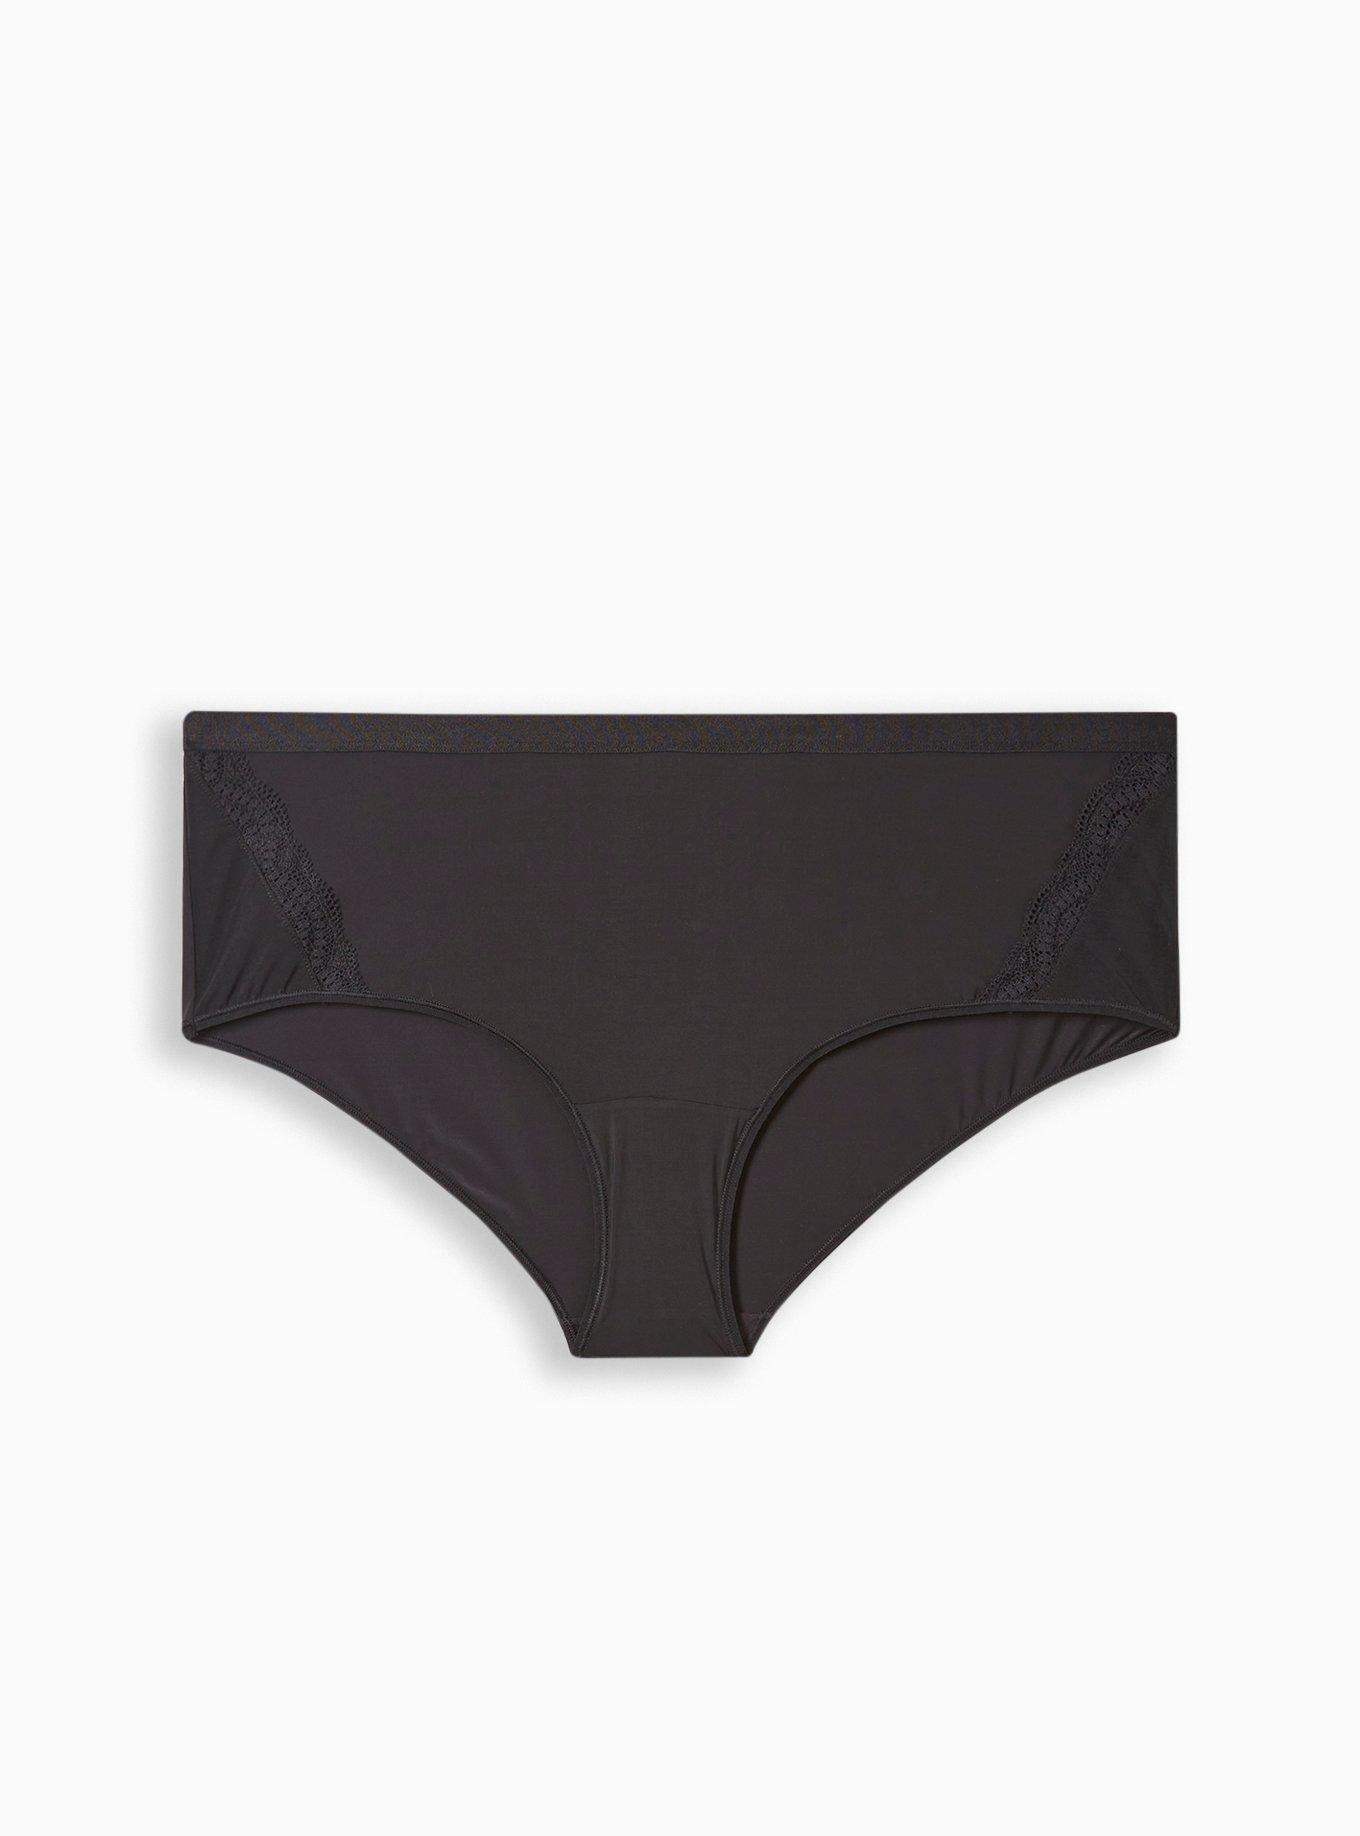 Women's invisible knickers in second skin microfibre Black Oh My Dim's